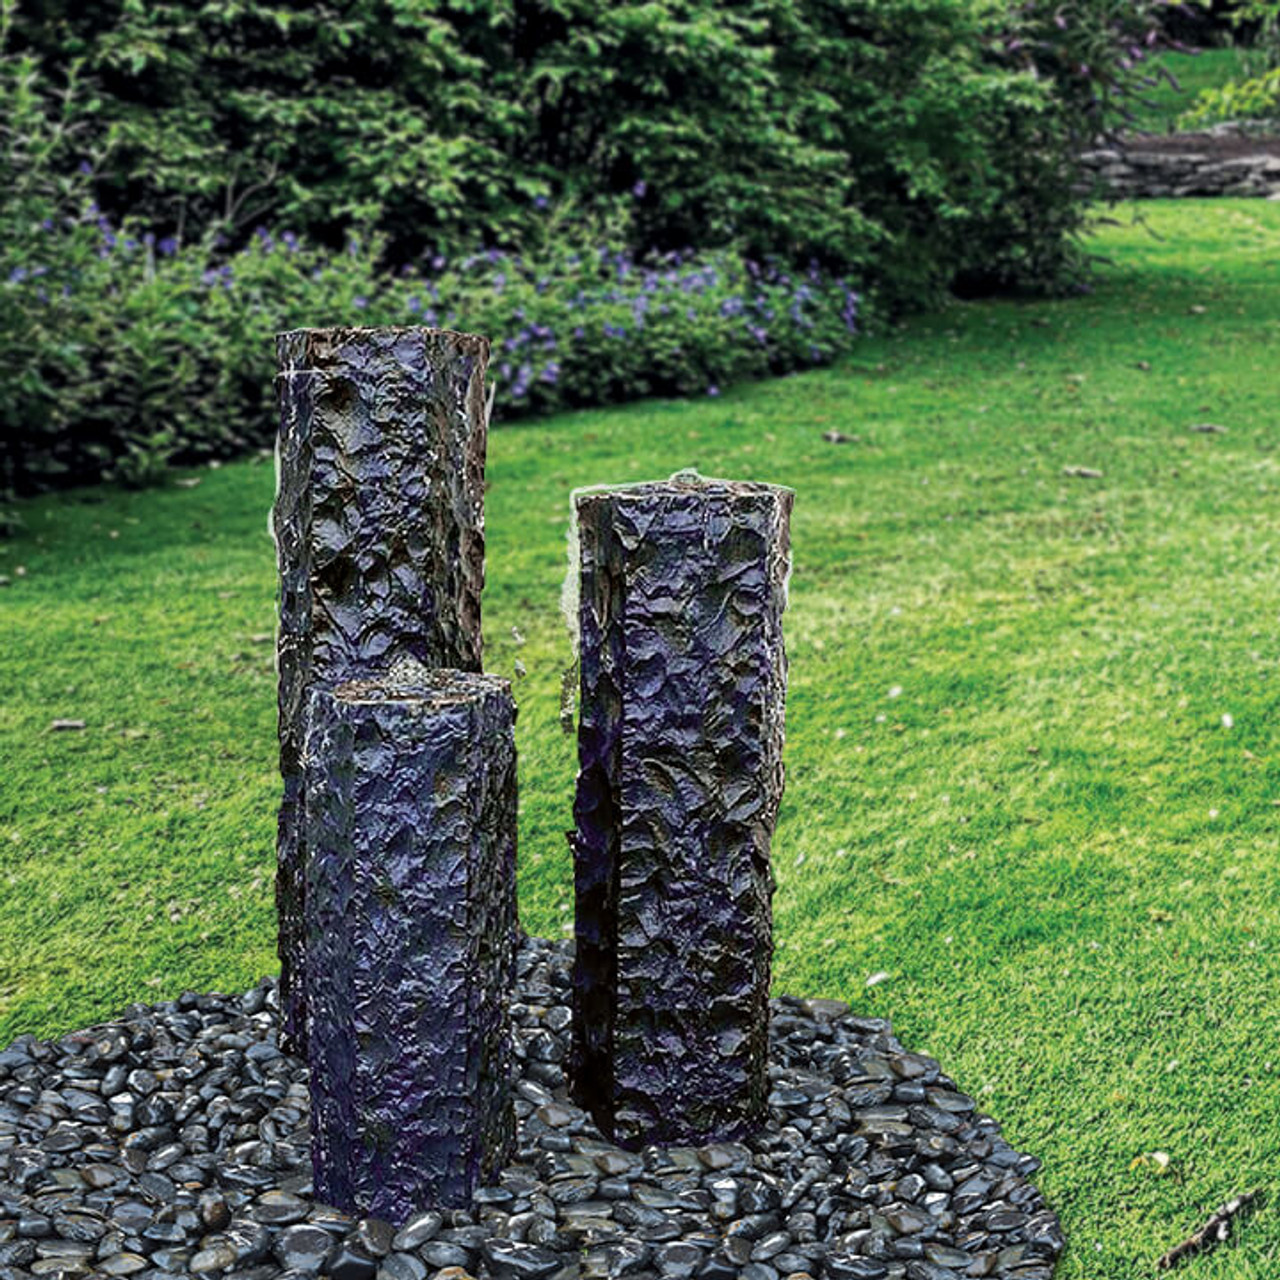 The unique texture of the richly colored Tranquil Décor Midnight Basalt Fountain Trio enhances the water flow, making it the perfect statement piece. Give your garden or yard an amazing centerpiece for all to admire. This complete kit contains three basalt columns, basin with support blocks, pump, plumbing and light kits.